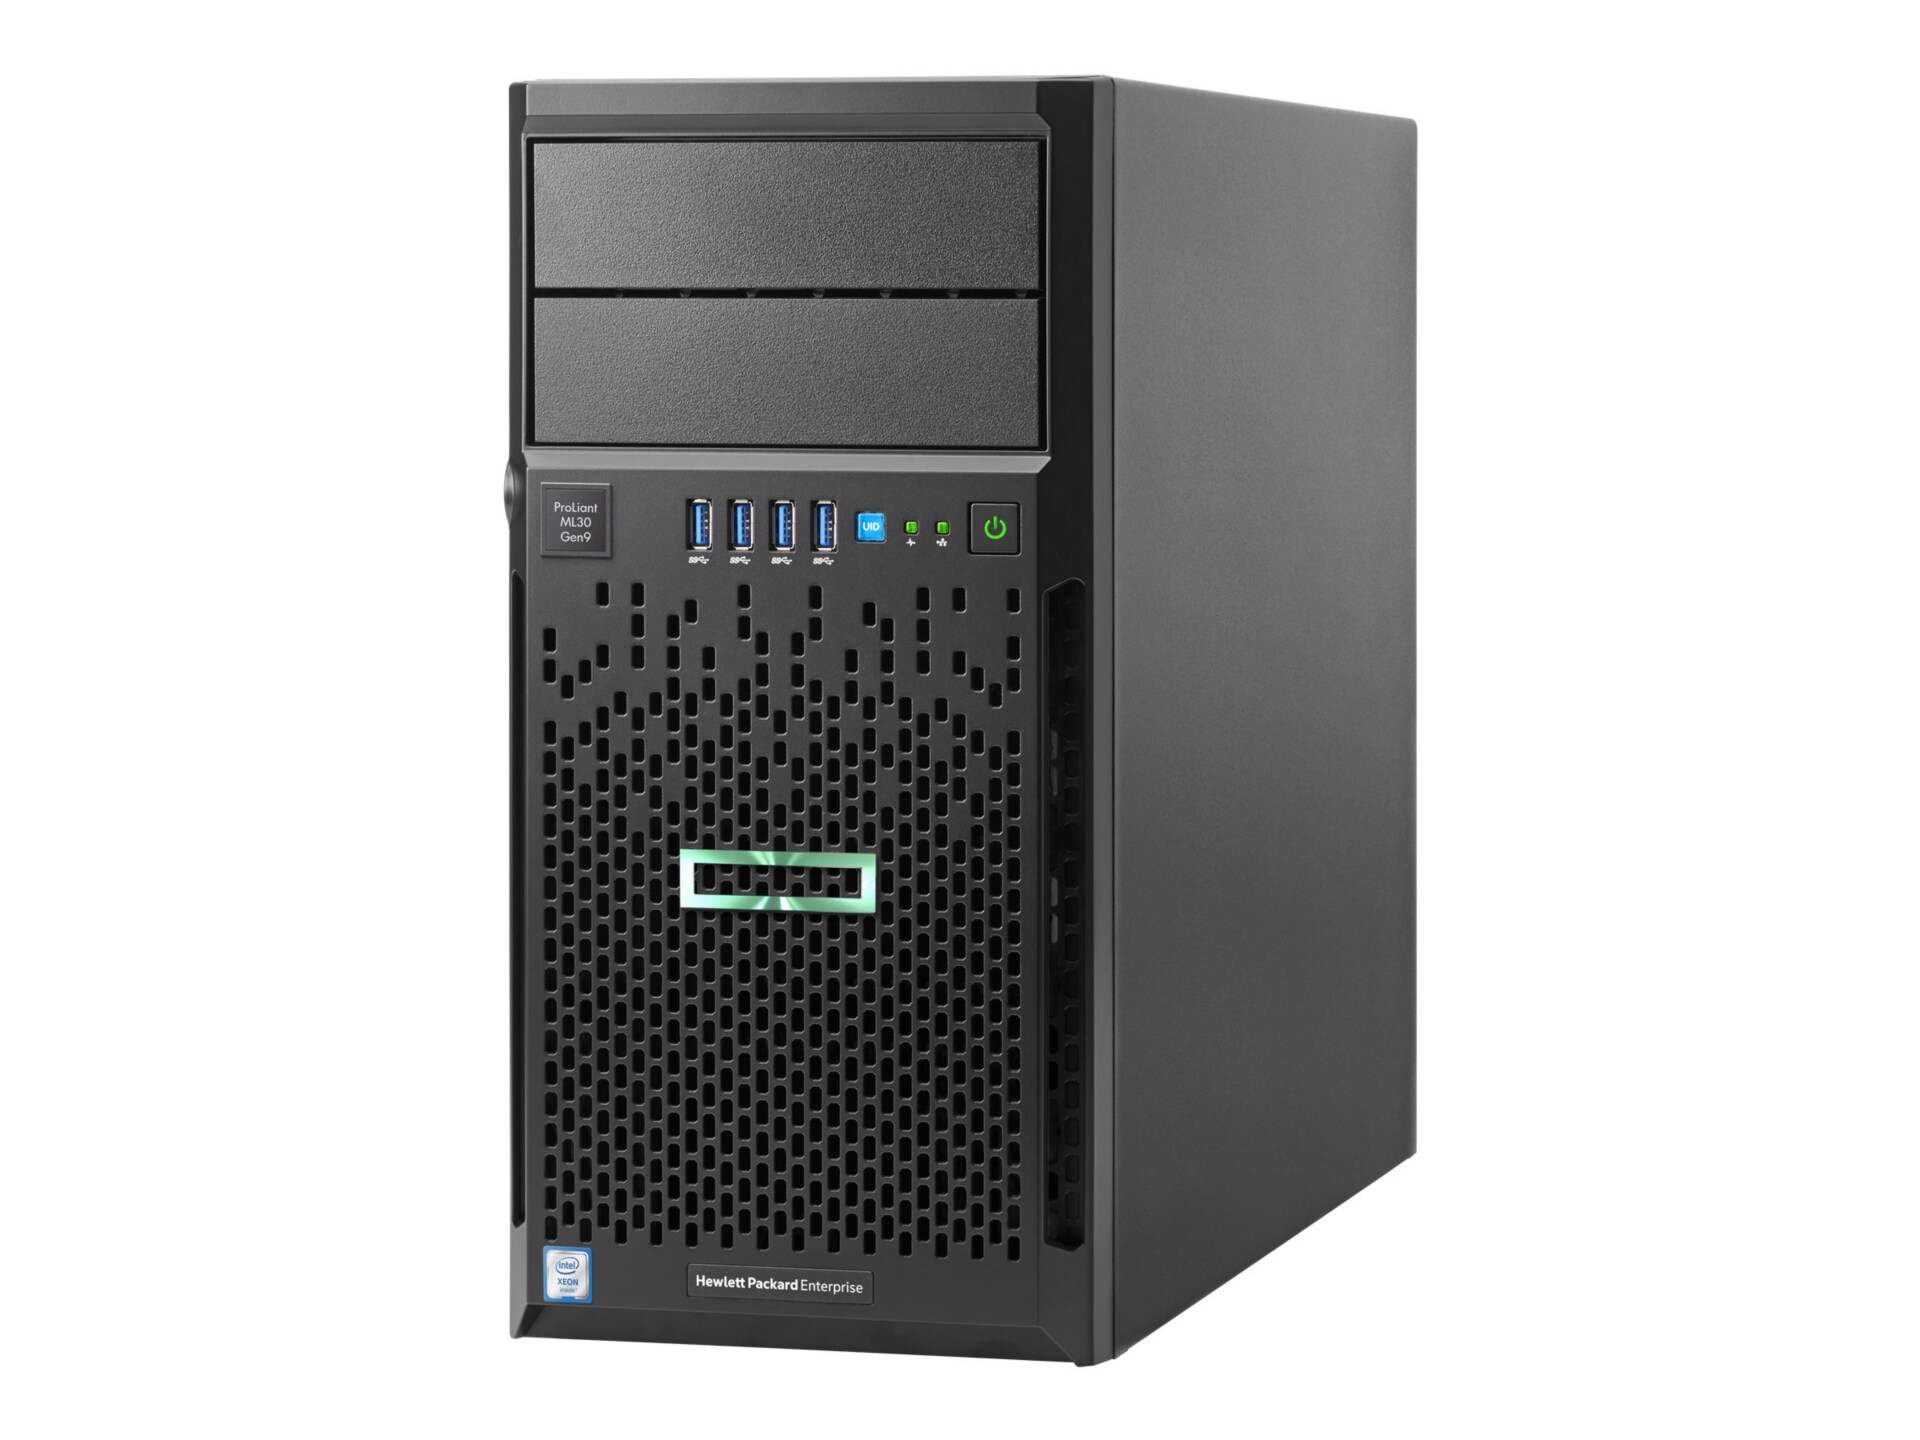 HPE ProLiant ML30 Gen9 - Special pricing while supplies last